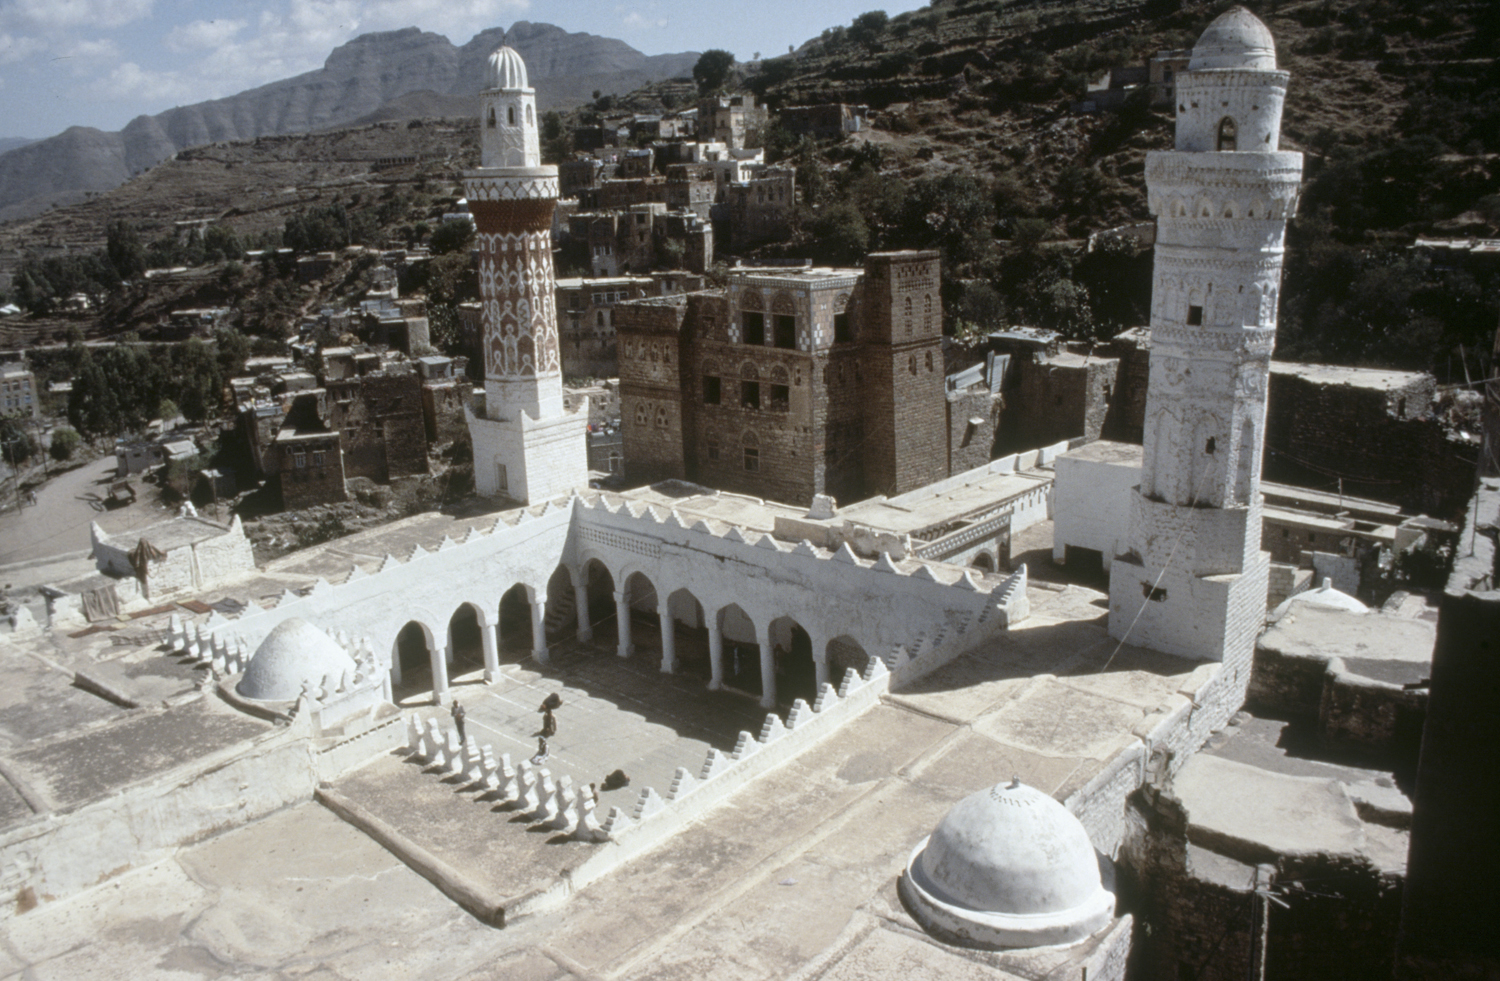 Elevated view of the mosque, showing courtyard and minarets